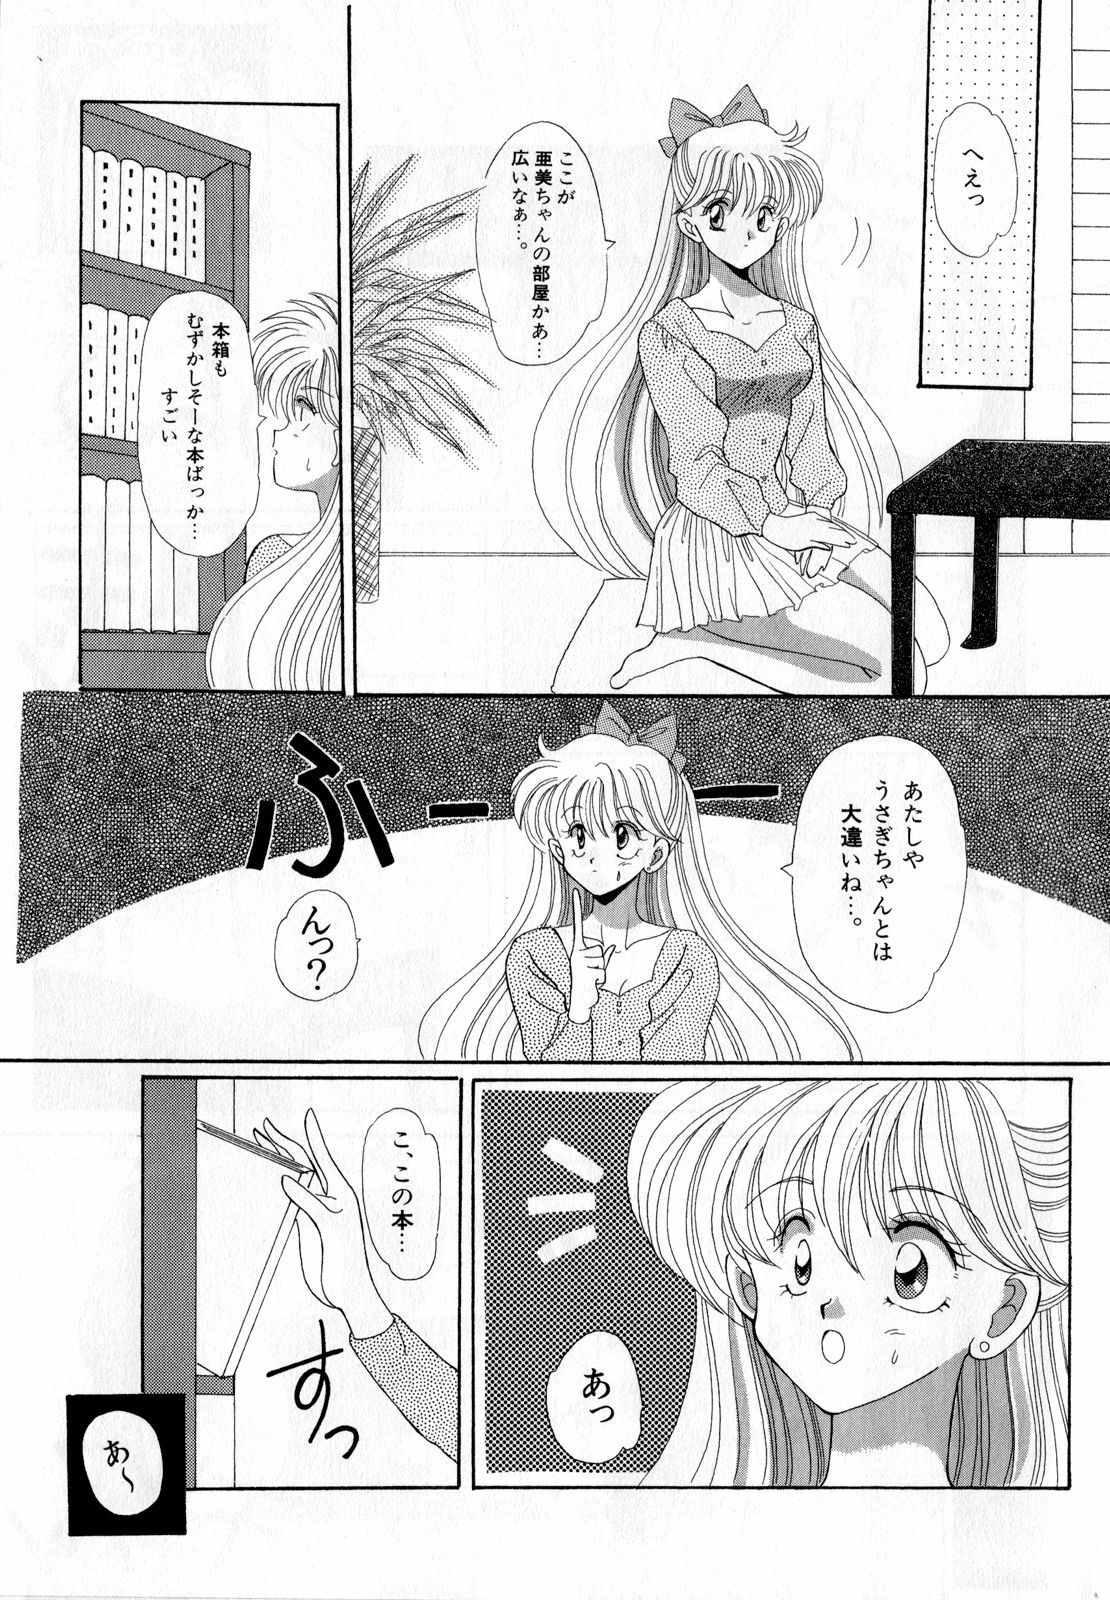 [Anthology] Lunatic Party 3 (Sailor Moon) page 42 full